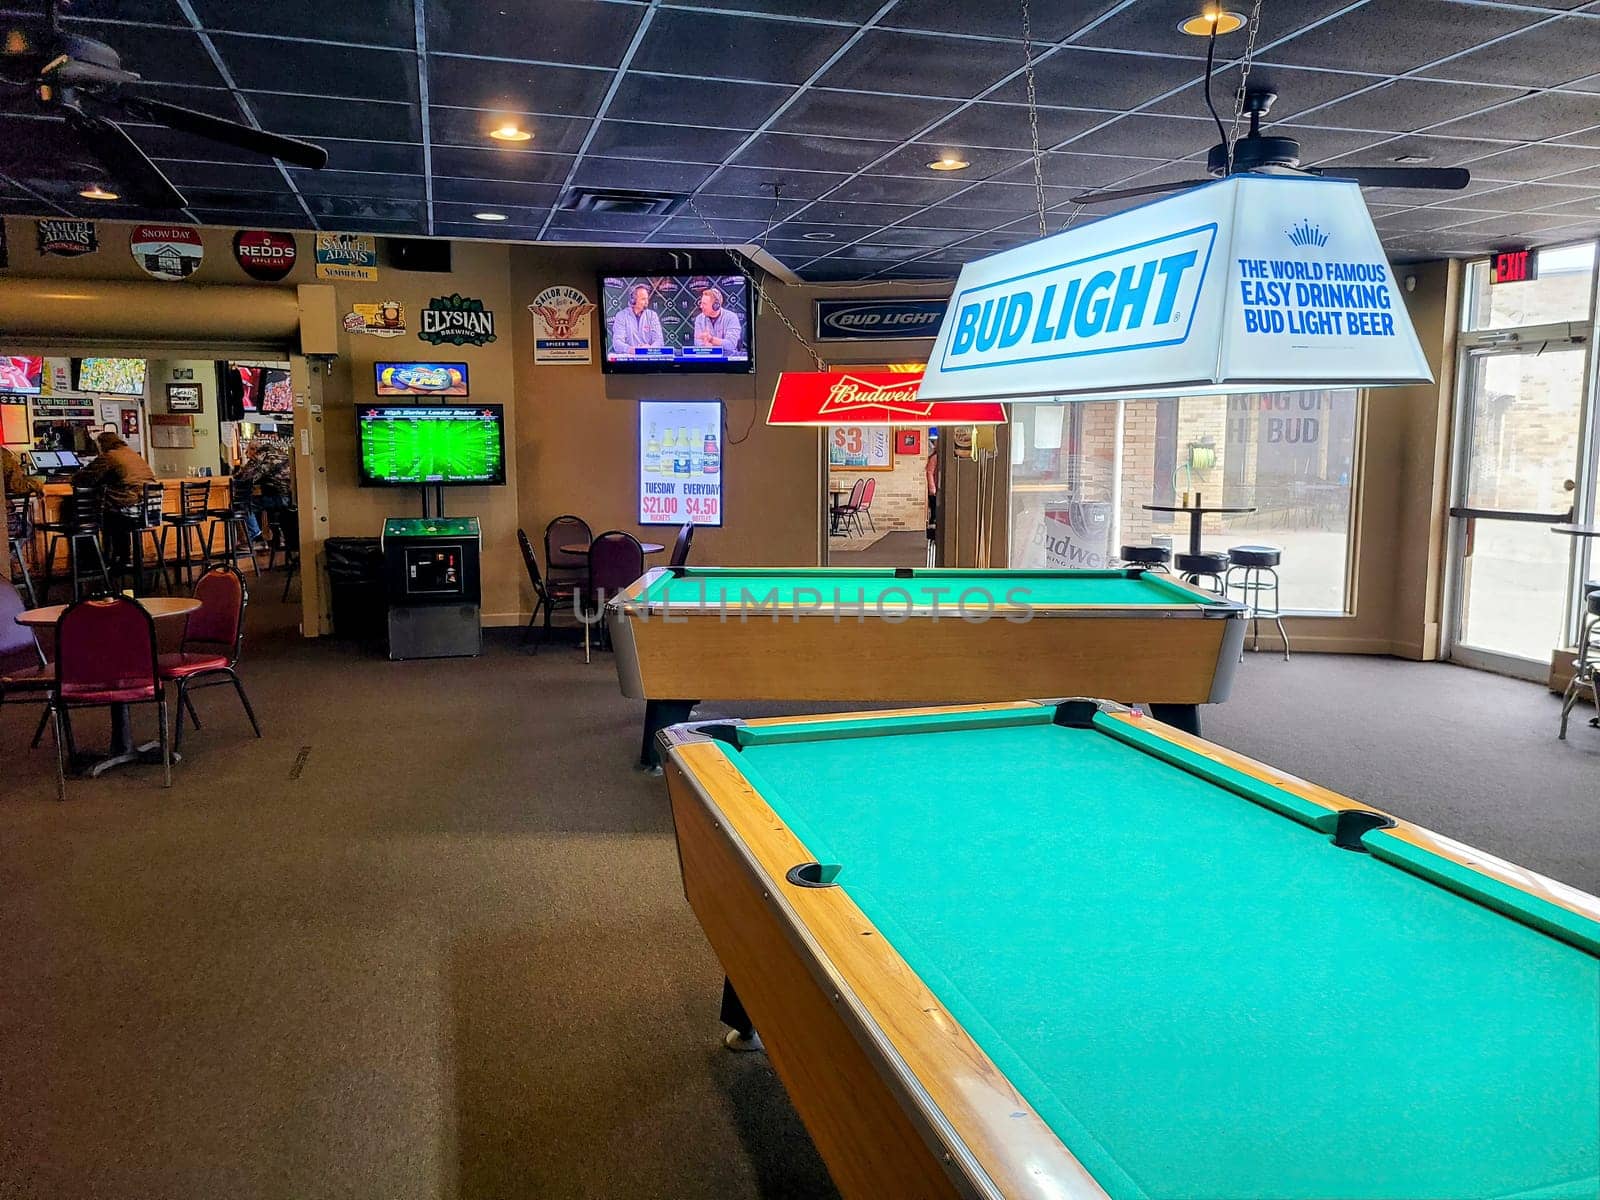 Casual sports bar in Fort Wayne with pool table, vibrant signage, and TVs broadcasting live sports.